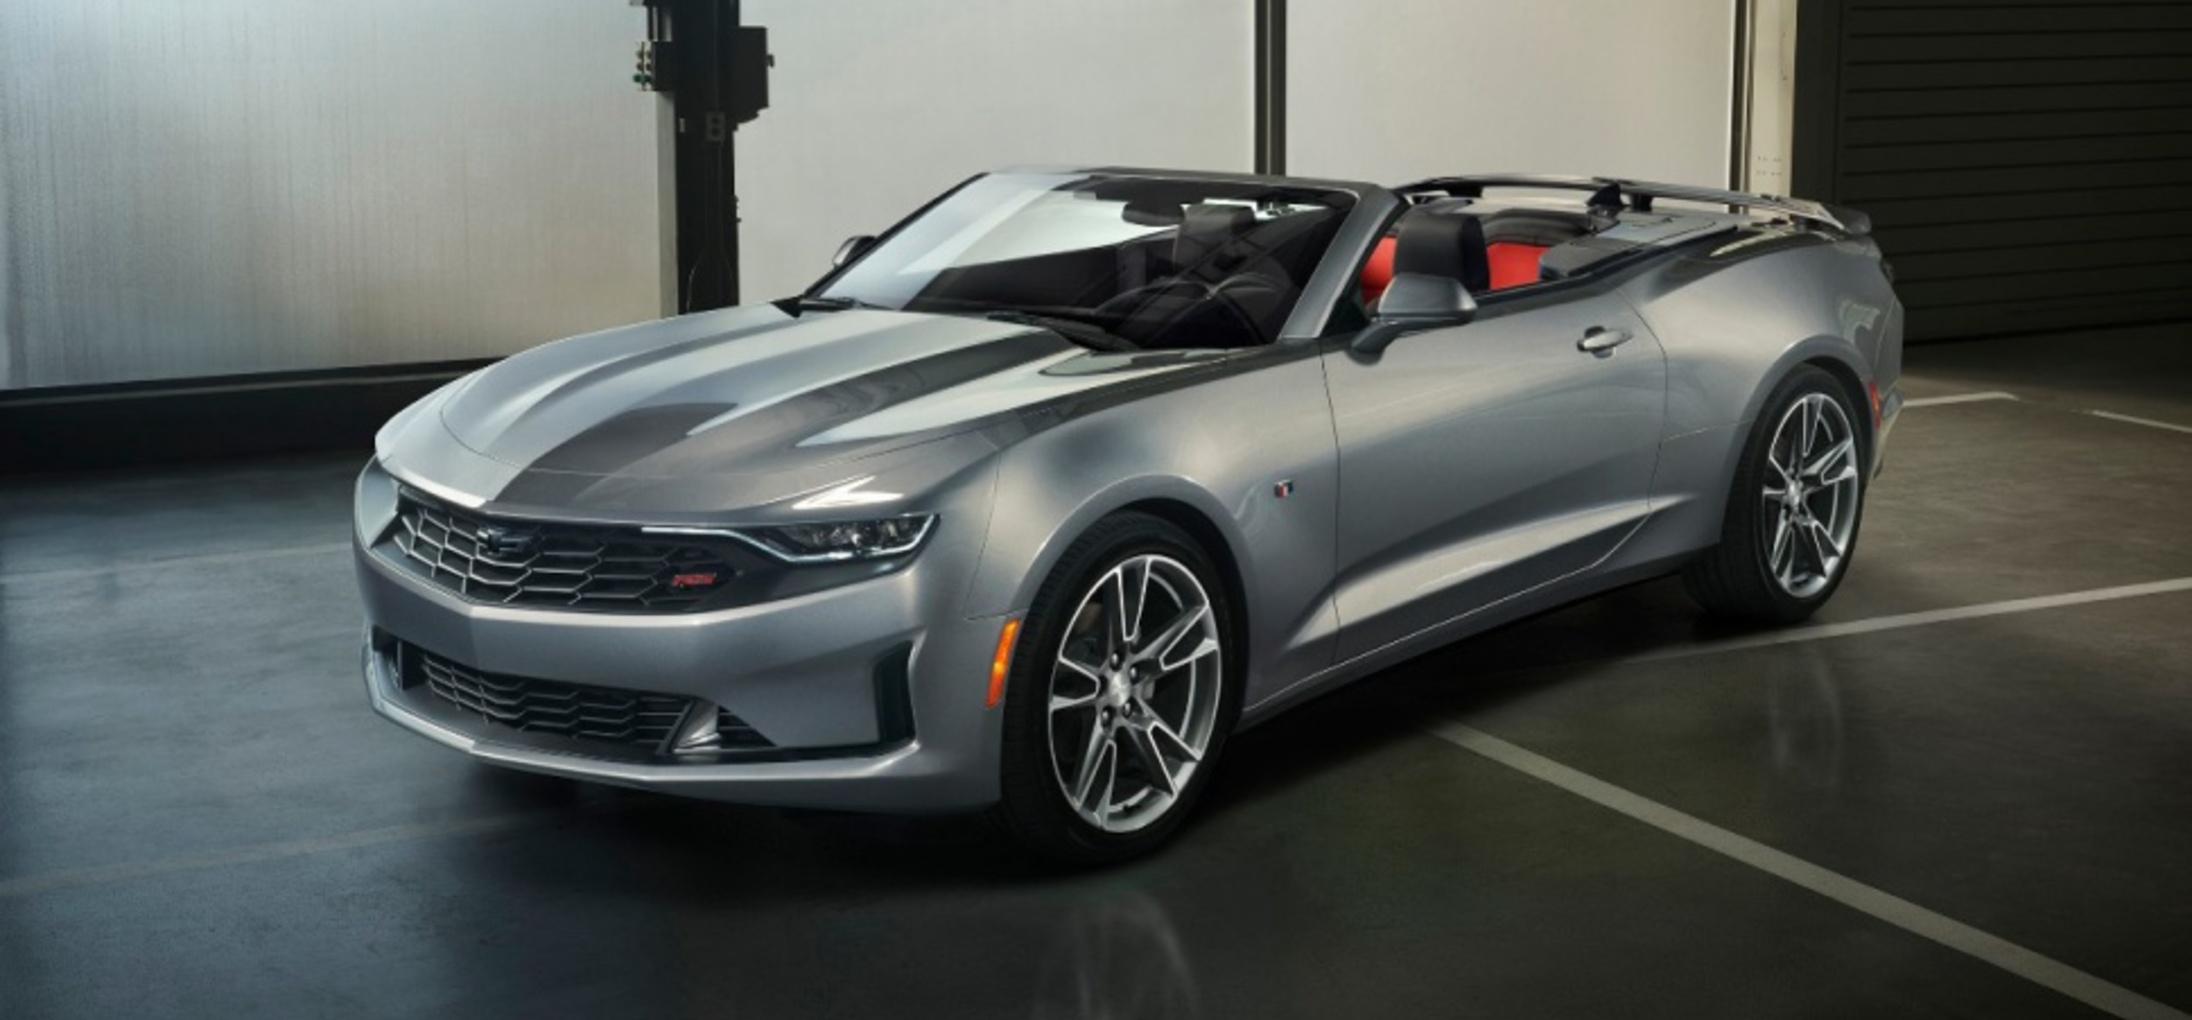 2021 Chevrolet Camaro Prices Reviews and Photos  MotorTrend